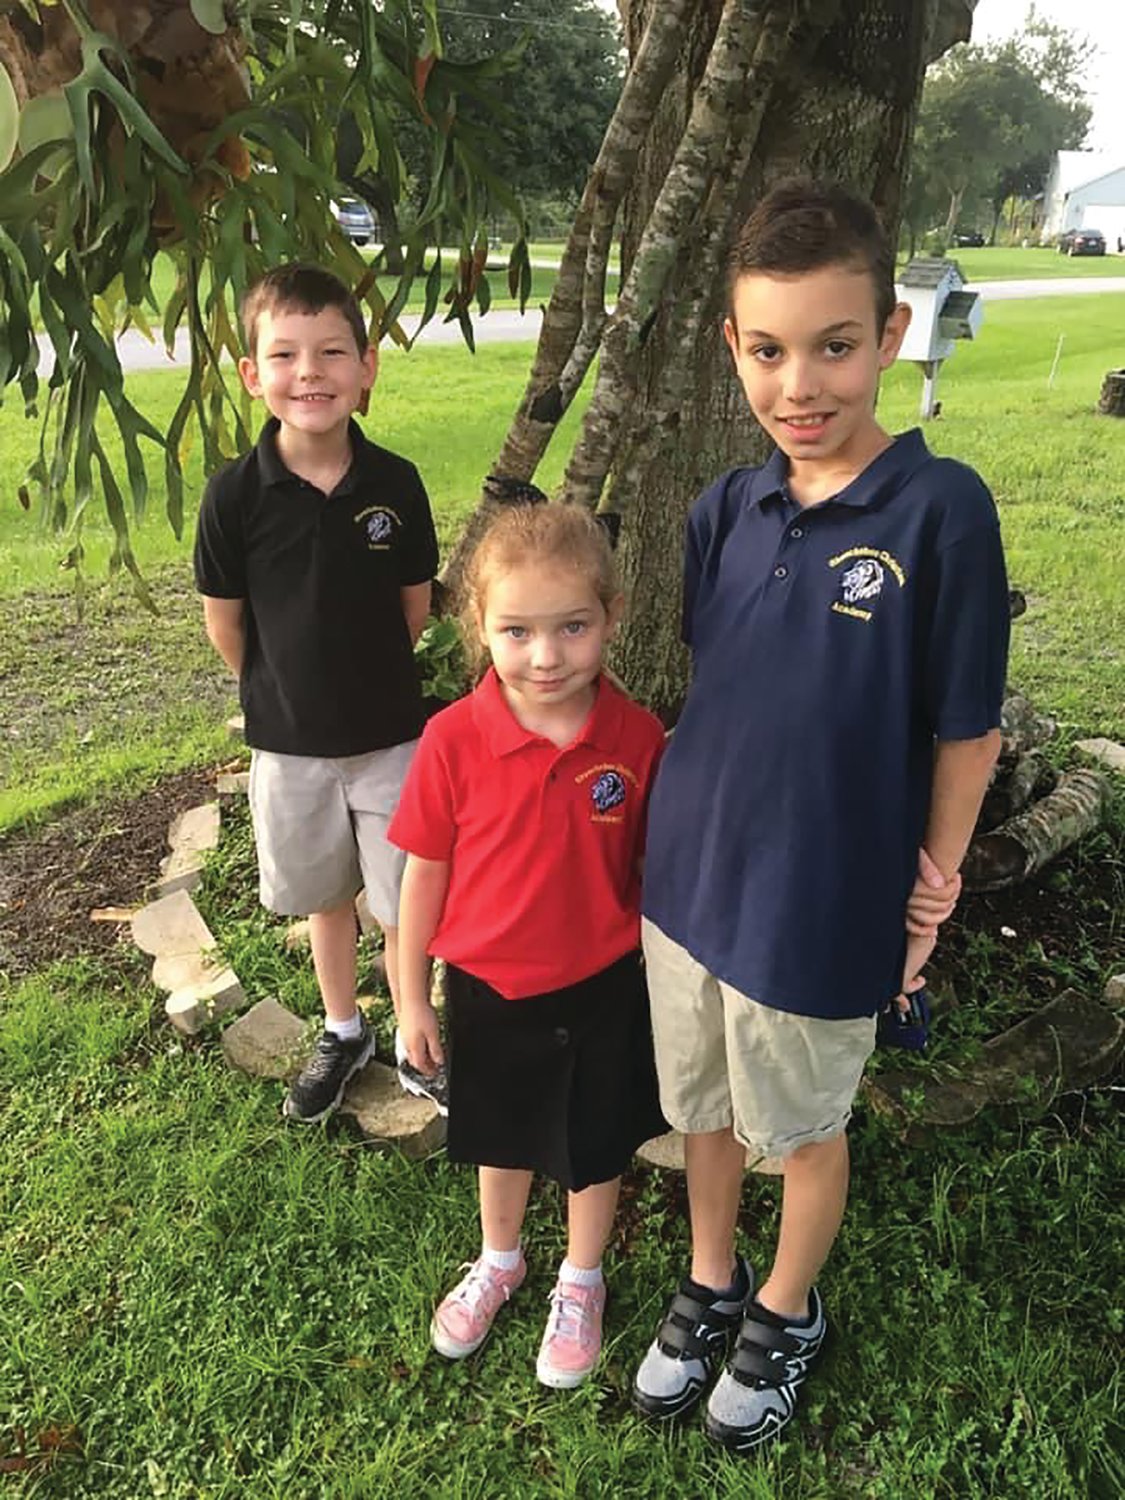 OKEECHOBEE – OCA students Justus, Aubrey and Nicholas Cole are ready for their first day of school.